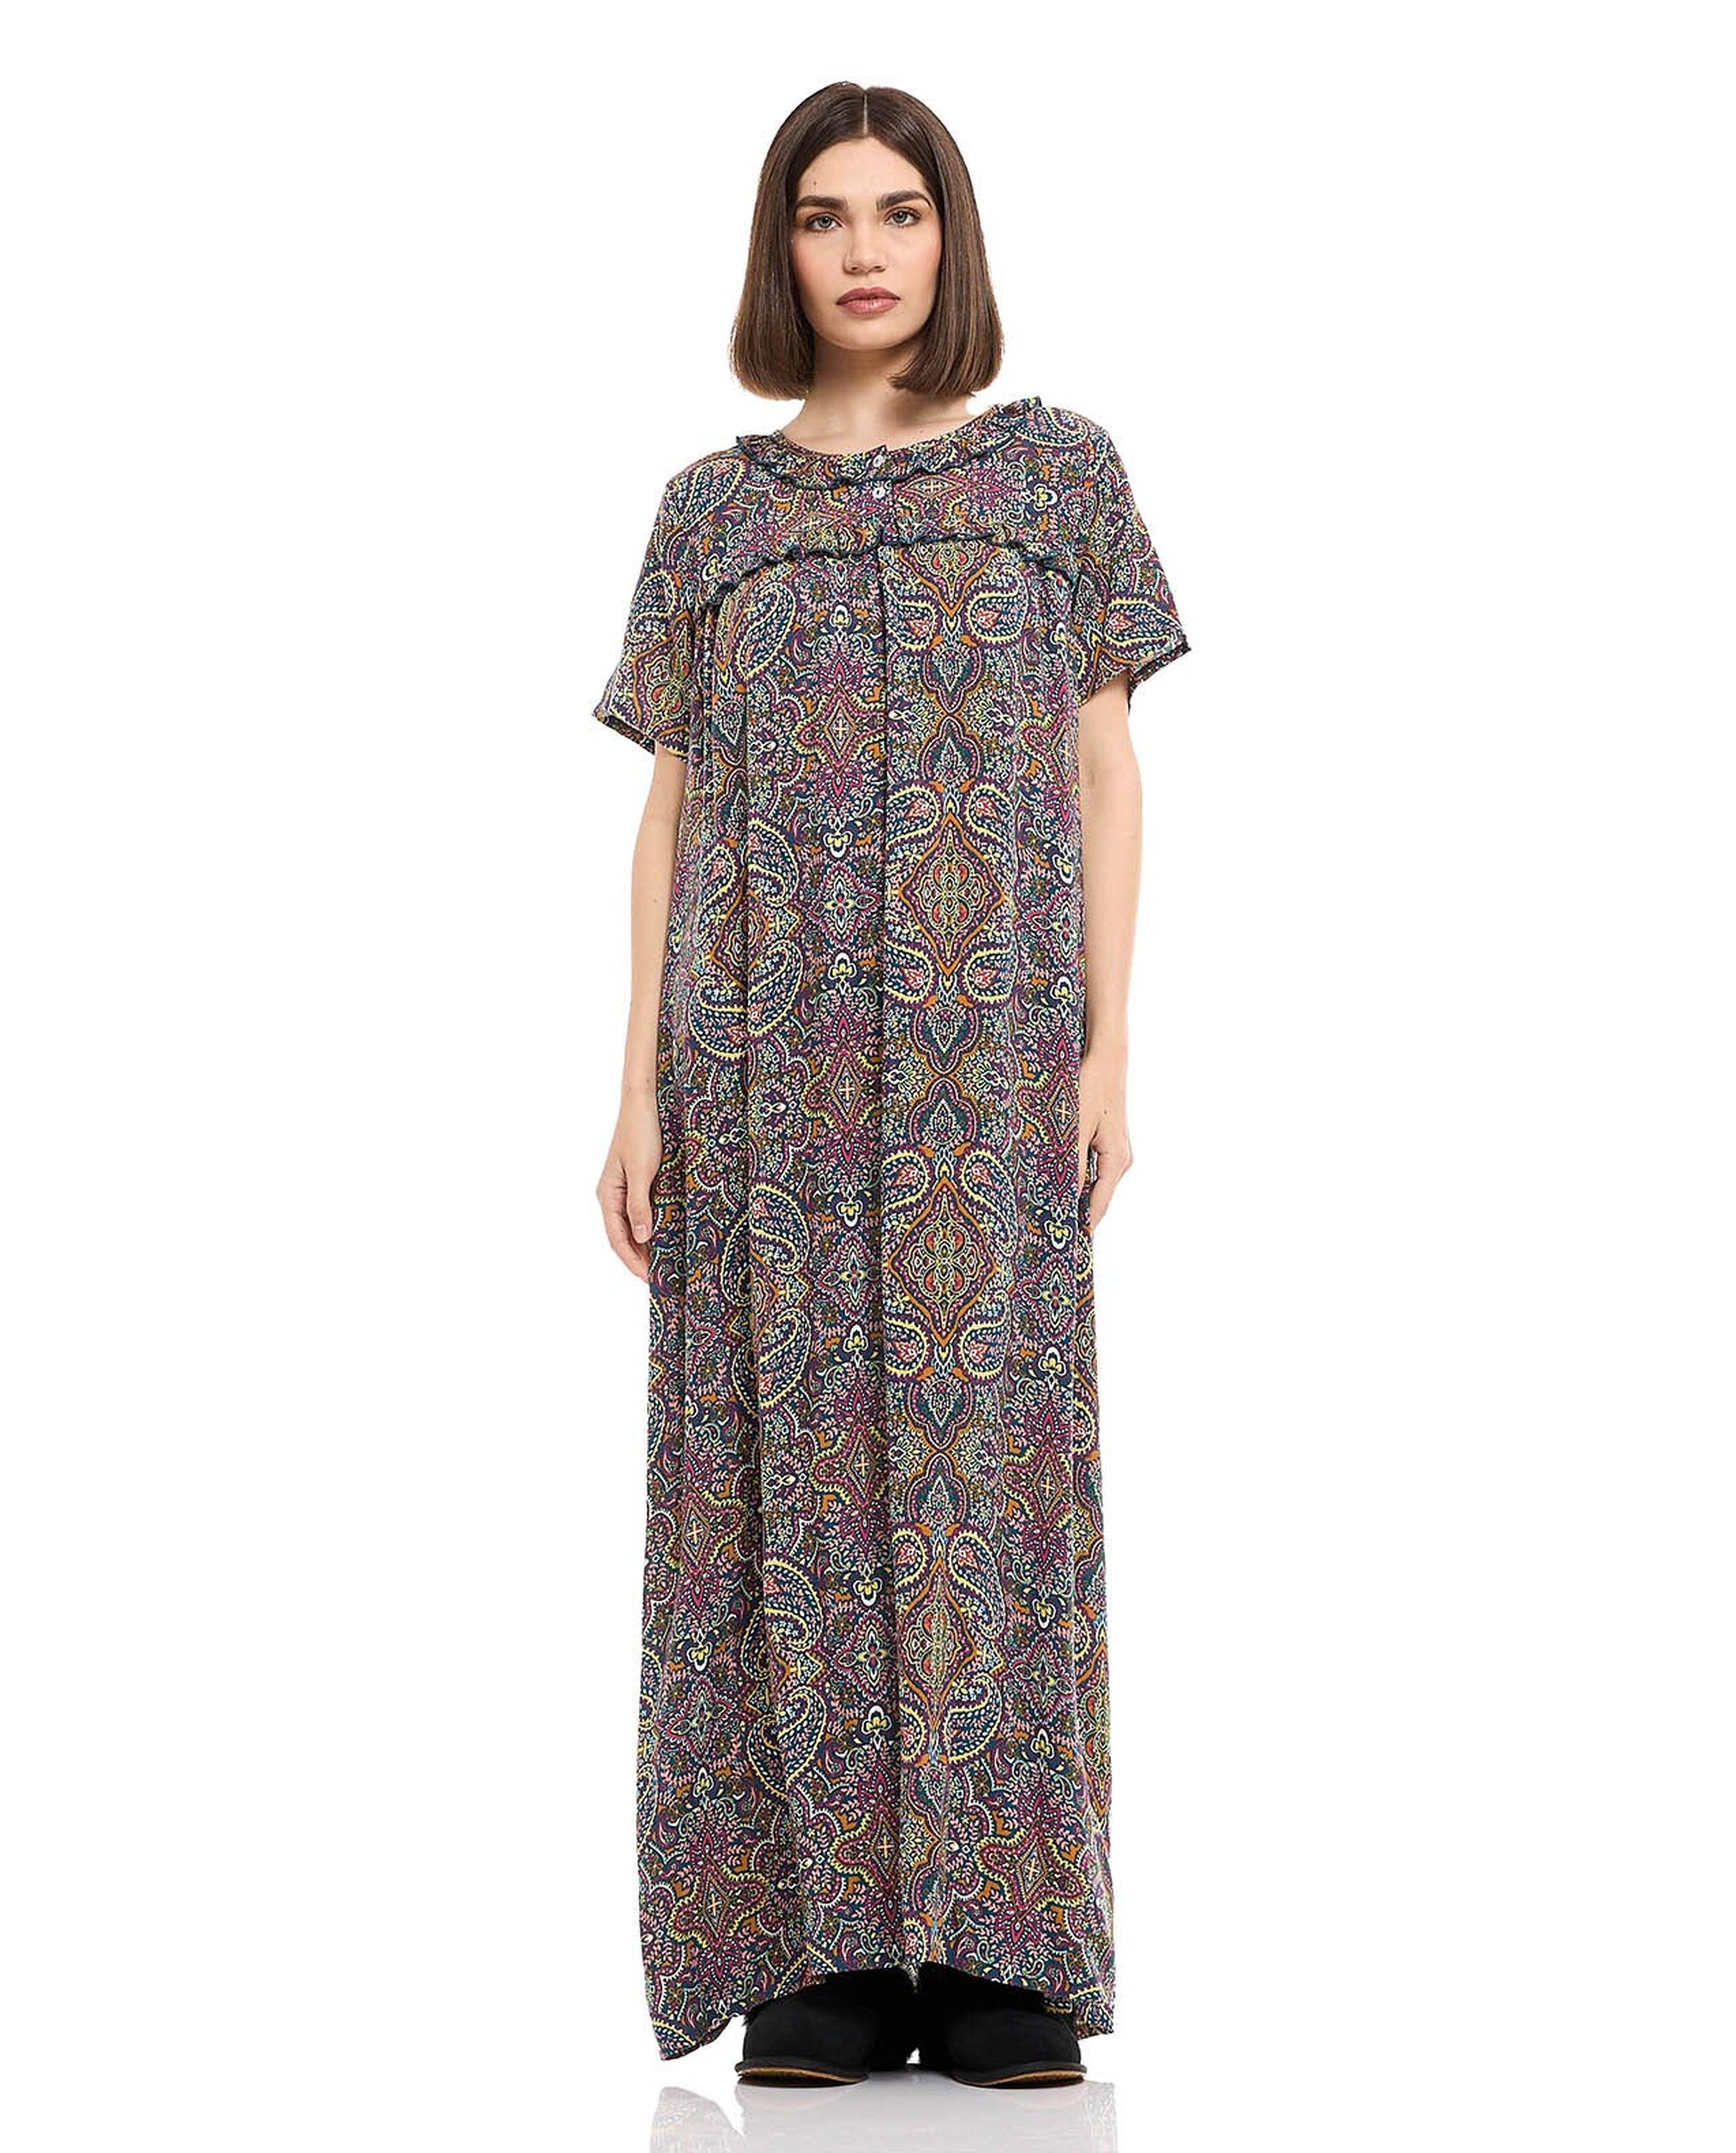 Paisley Patterned Night Gown with Short Sleeves